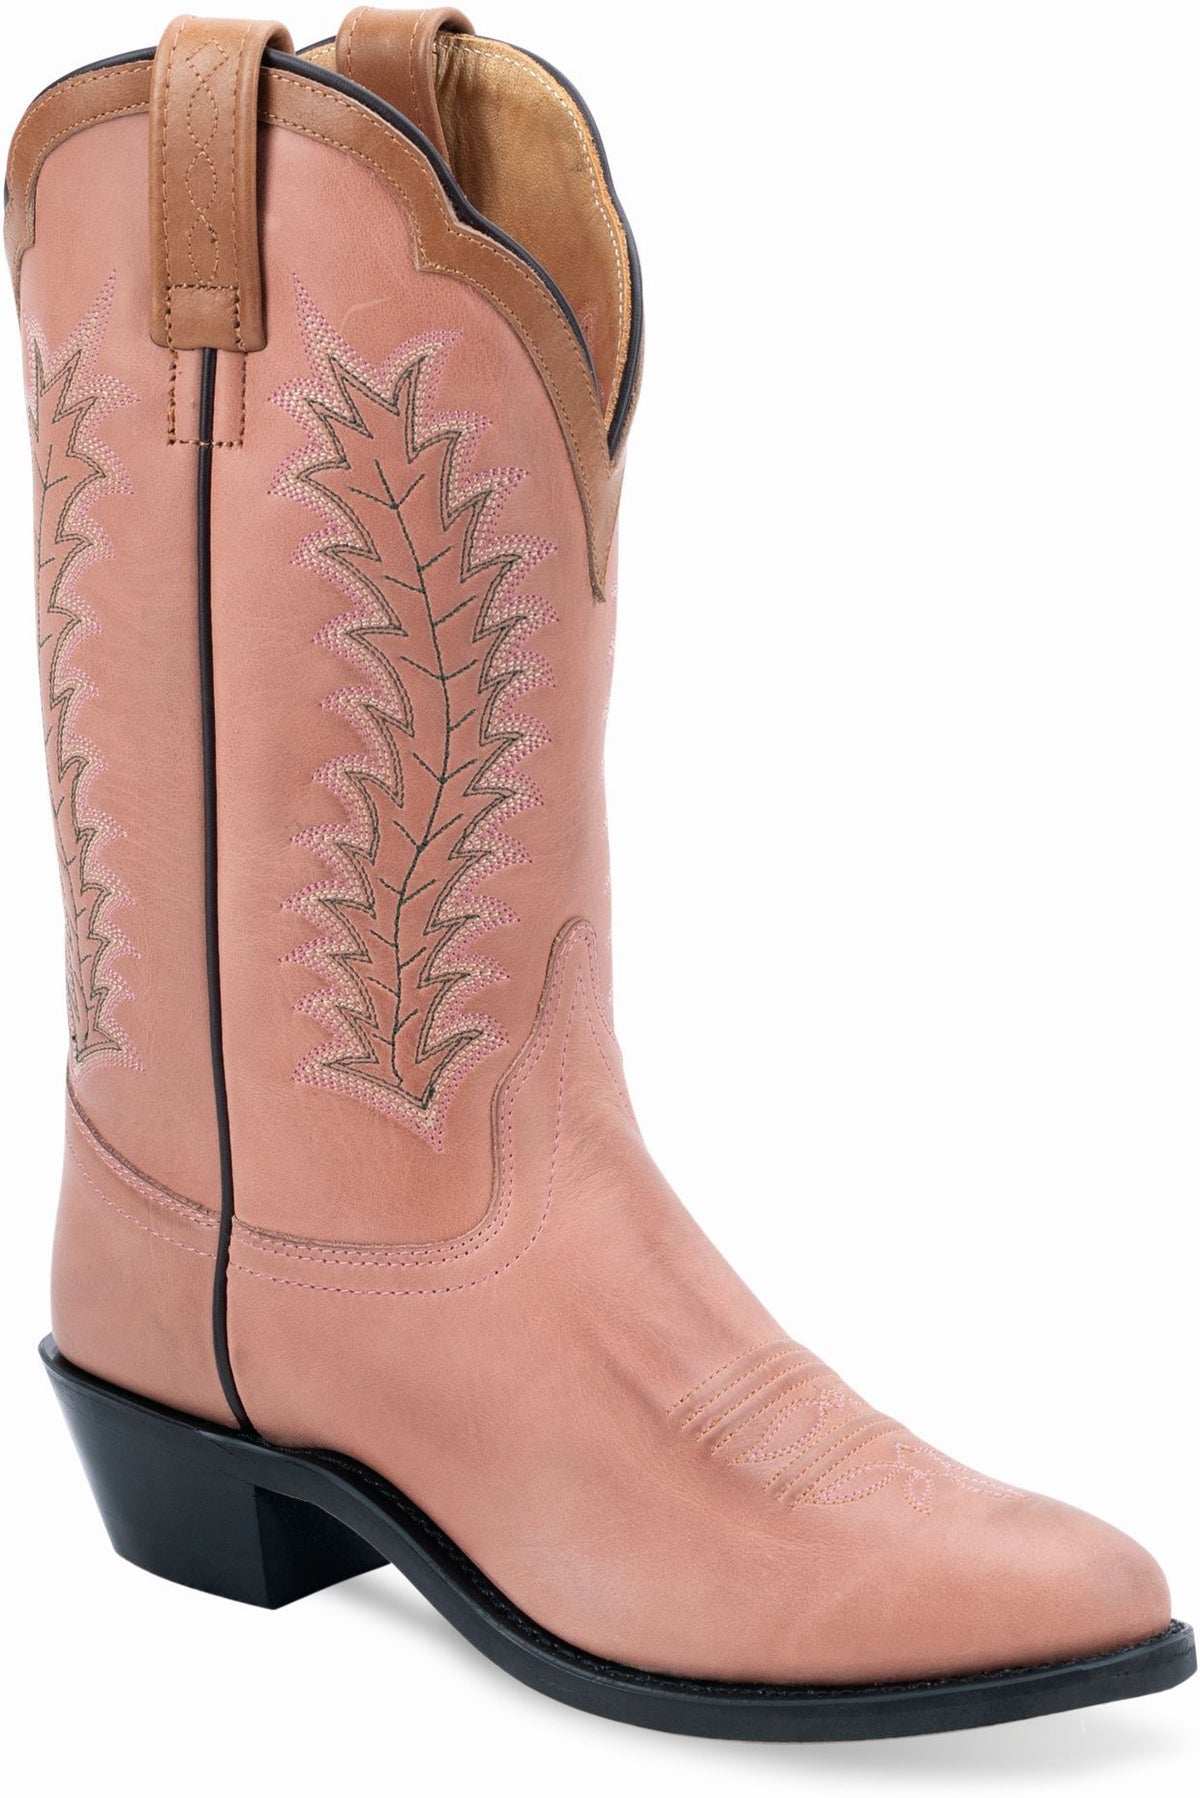 Old West Baby Pink with Beige Collar Women's Western Boots